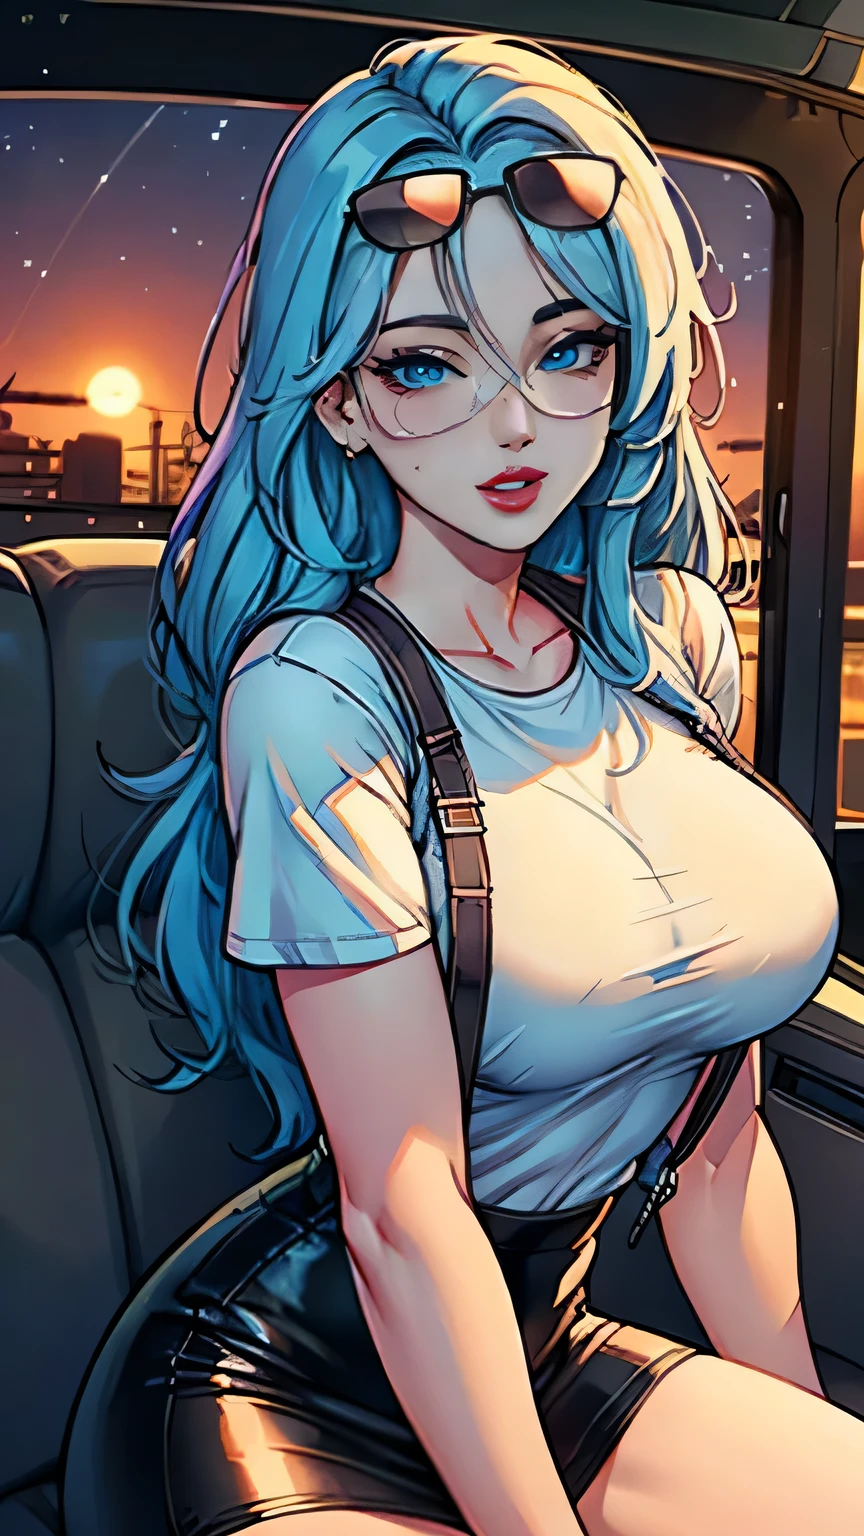 Masterpiece, raw,  beautiful art, professional artist, 8k, art style by sciamano240, very detailed face, very detailed hair, 1 girl , perfectly drawn body, beautiful face, long light blue hair , very detailed blue eyes , rosey cheeks, intricate details in eyes , happy expression, lipstick, very close up on face, night time, sitting inside a sport cars, sitting in driver seat, wearing white t shirt, black suspenders, leather pencil skirt, sun glasses on head, joyful smile, 